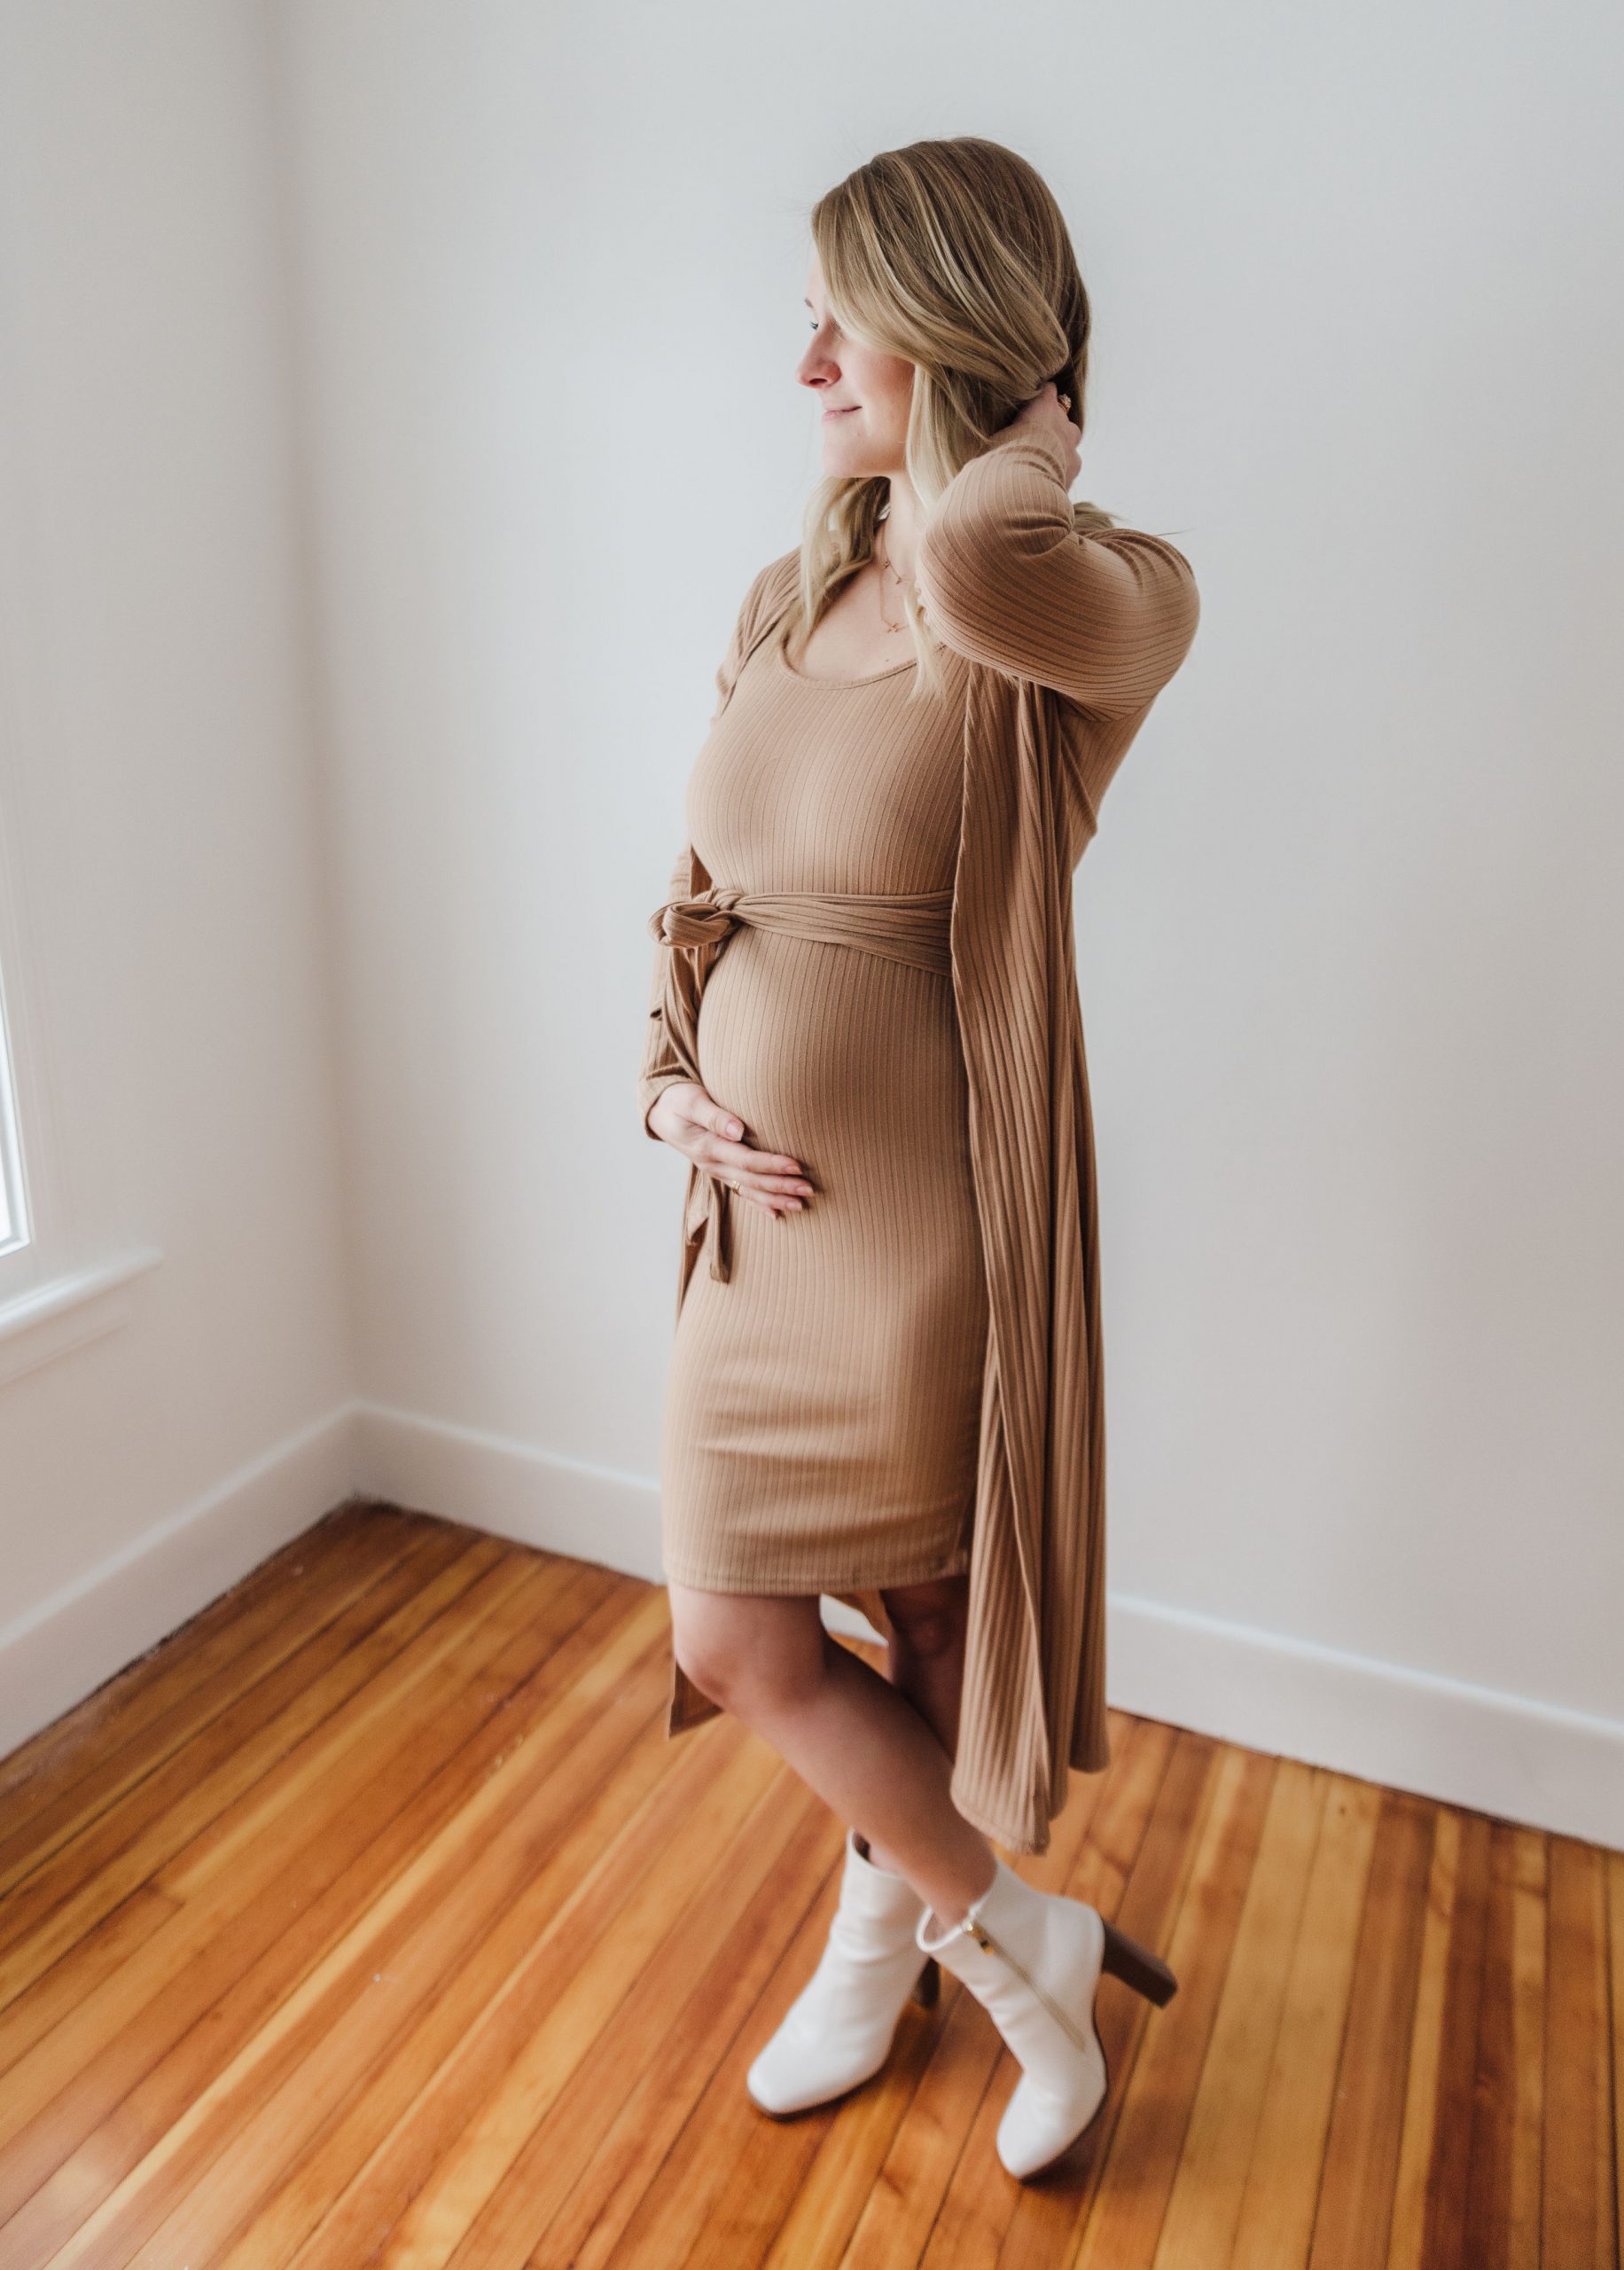 Maternity Clothes: Comfortable and Cute Items you will Actually Wear | Miranda Schroeder Blog

www.mirandaschroeder.com